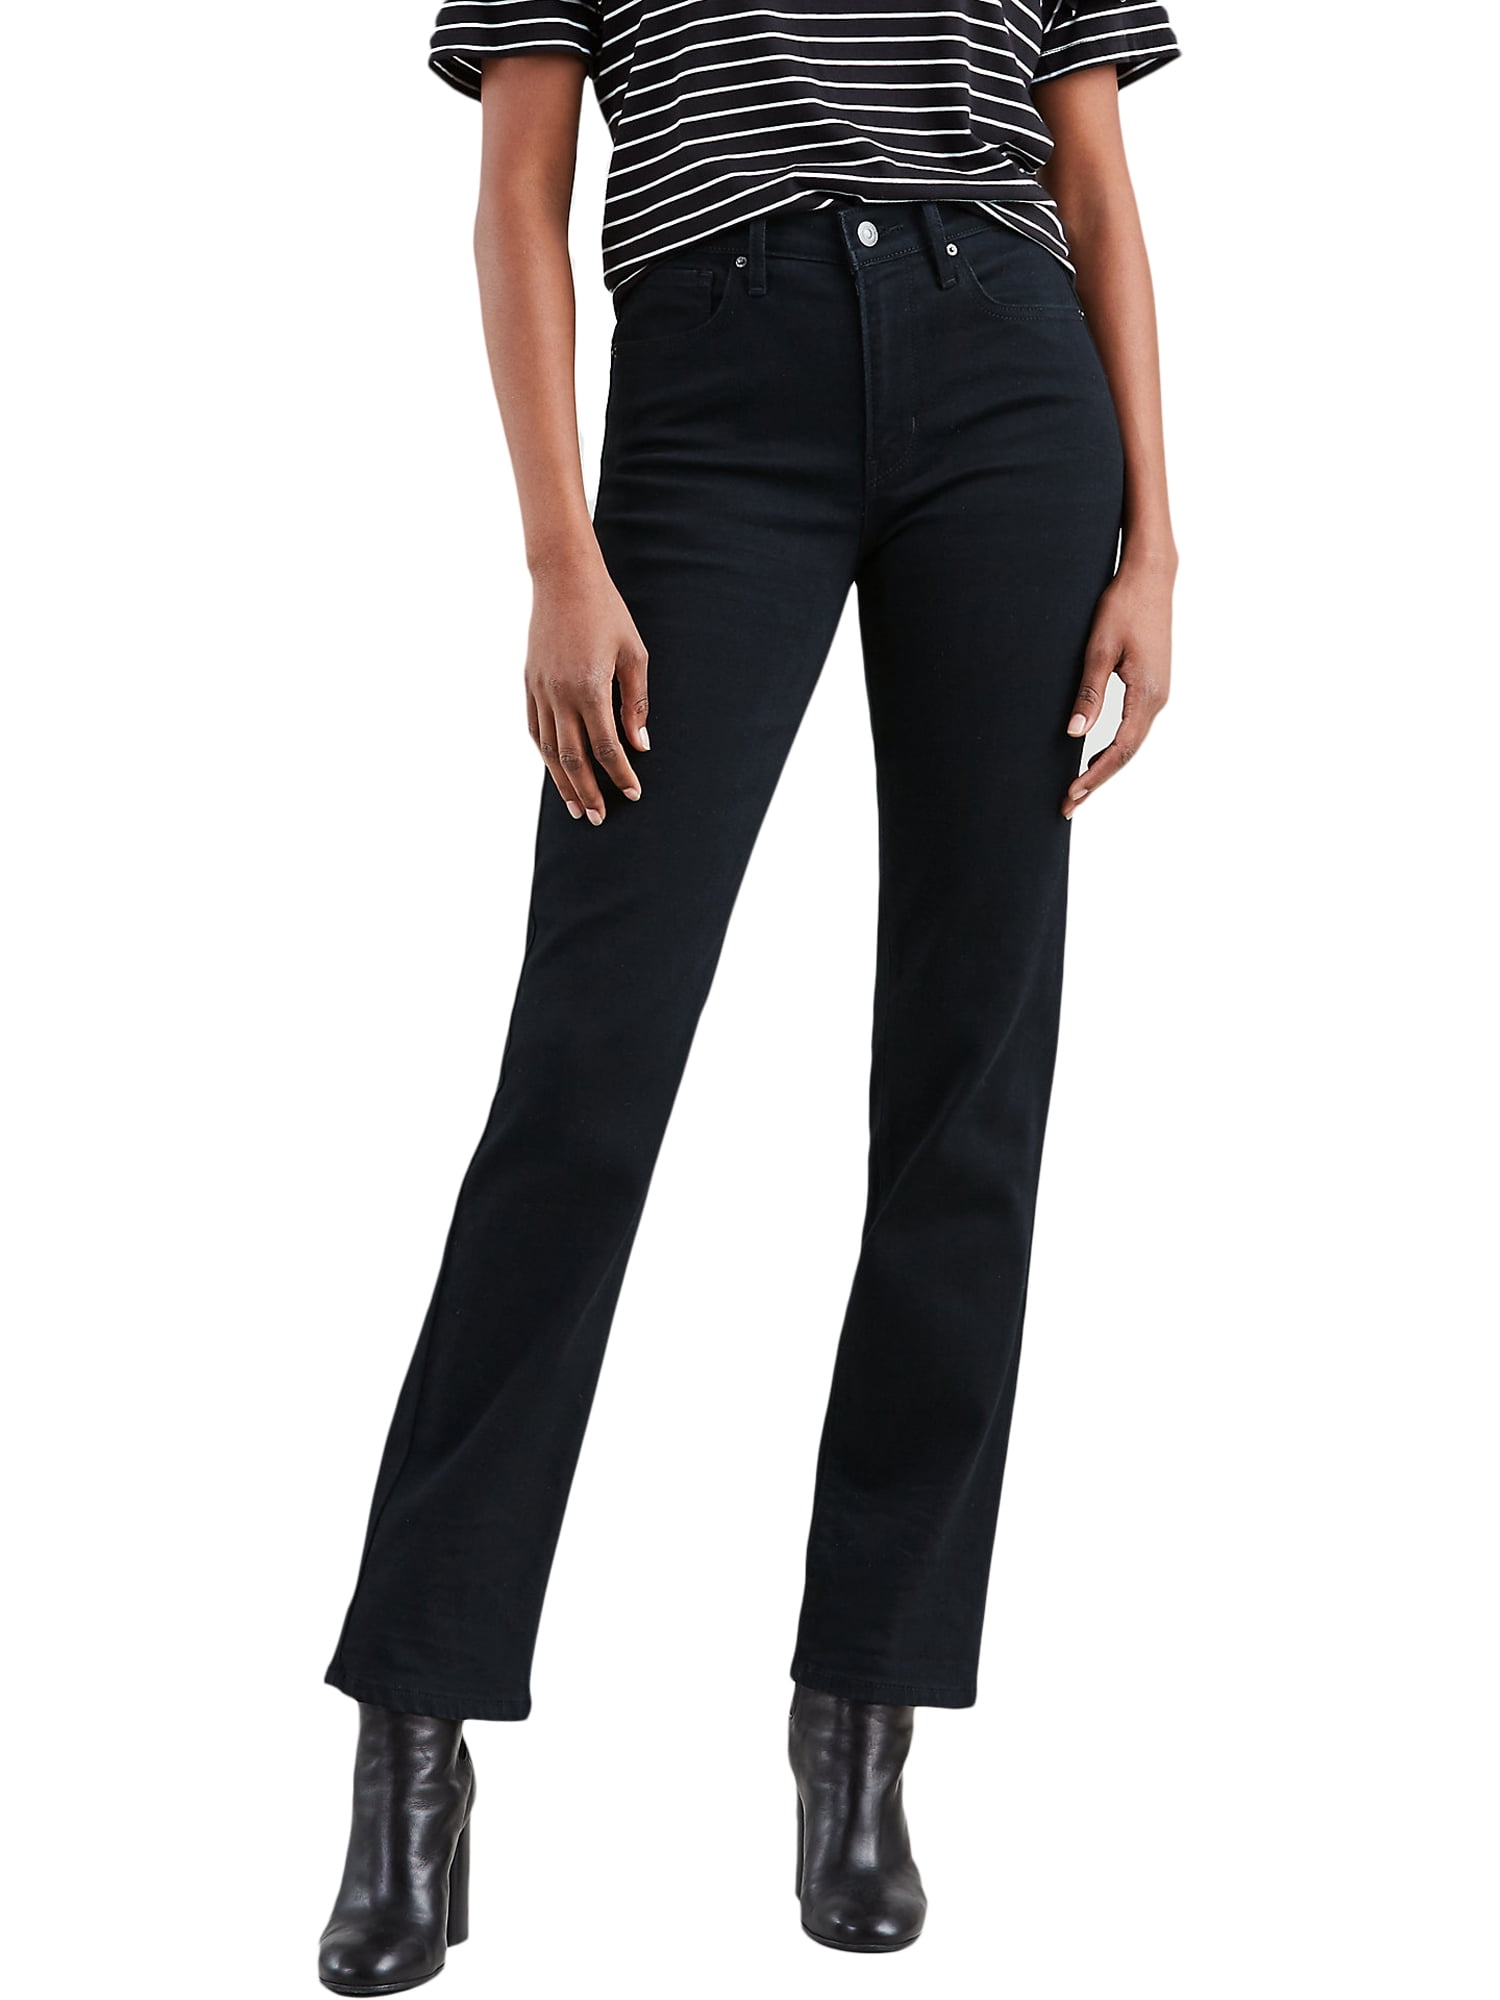 Levi's Original Red Tab Women's 724 High-Rise Straight Jeans 